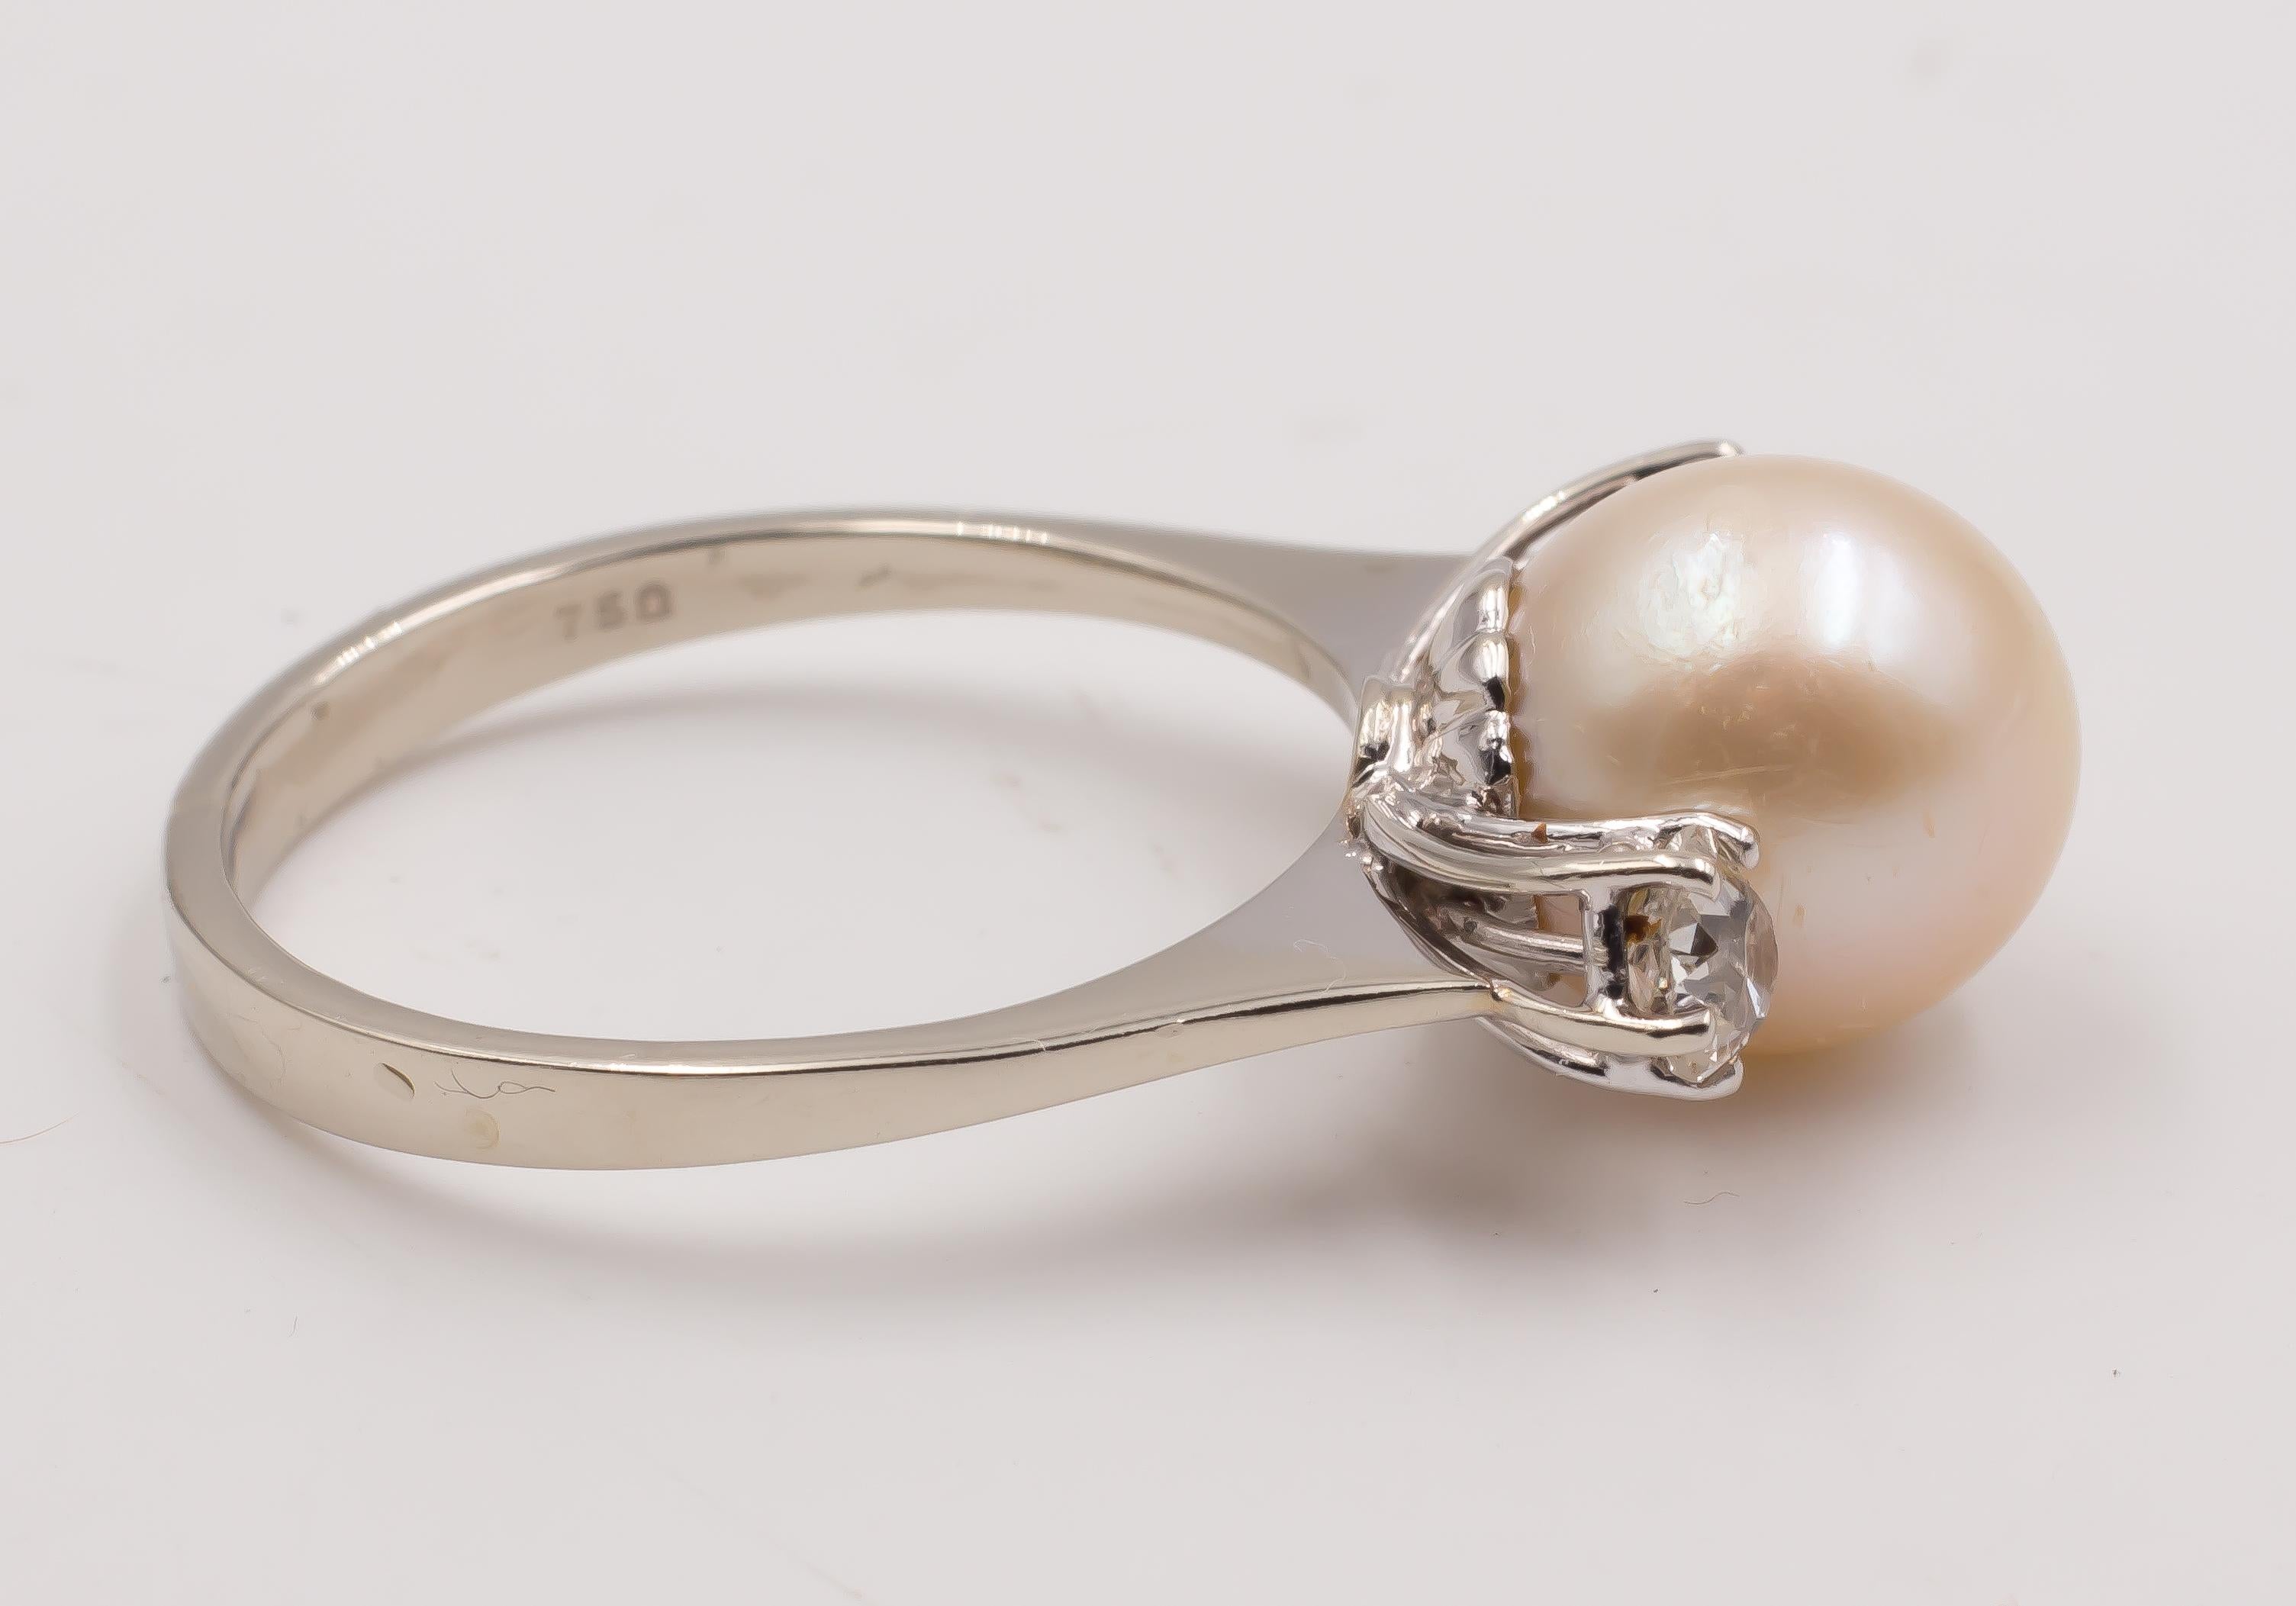 This simple but elegant ring is set with a central pearl, flanked on either by a 0.2ct ca. diamond. 
The ring is crafted in white gold throughout. 

MATERIALS
Gold, pearl and diamonds (totalling 0.4ct ca.)

RING SIZE
7¾ US (resizable)